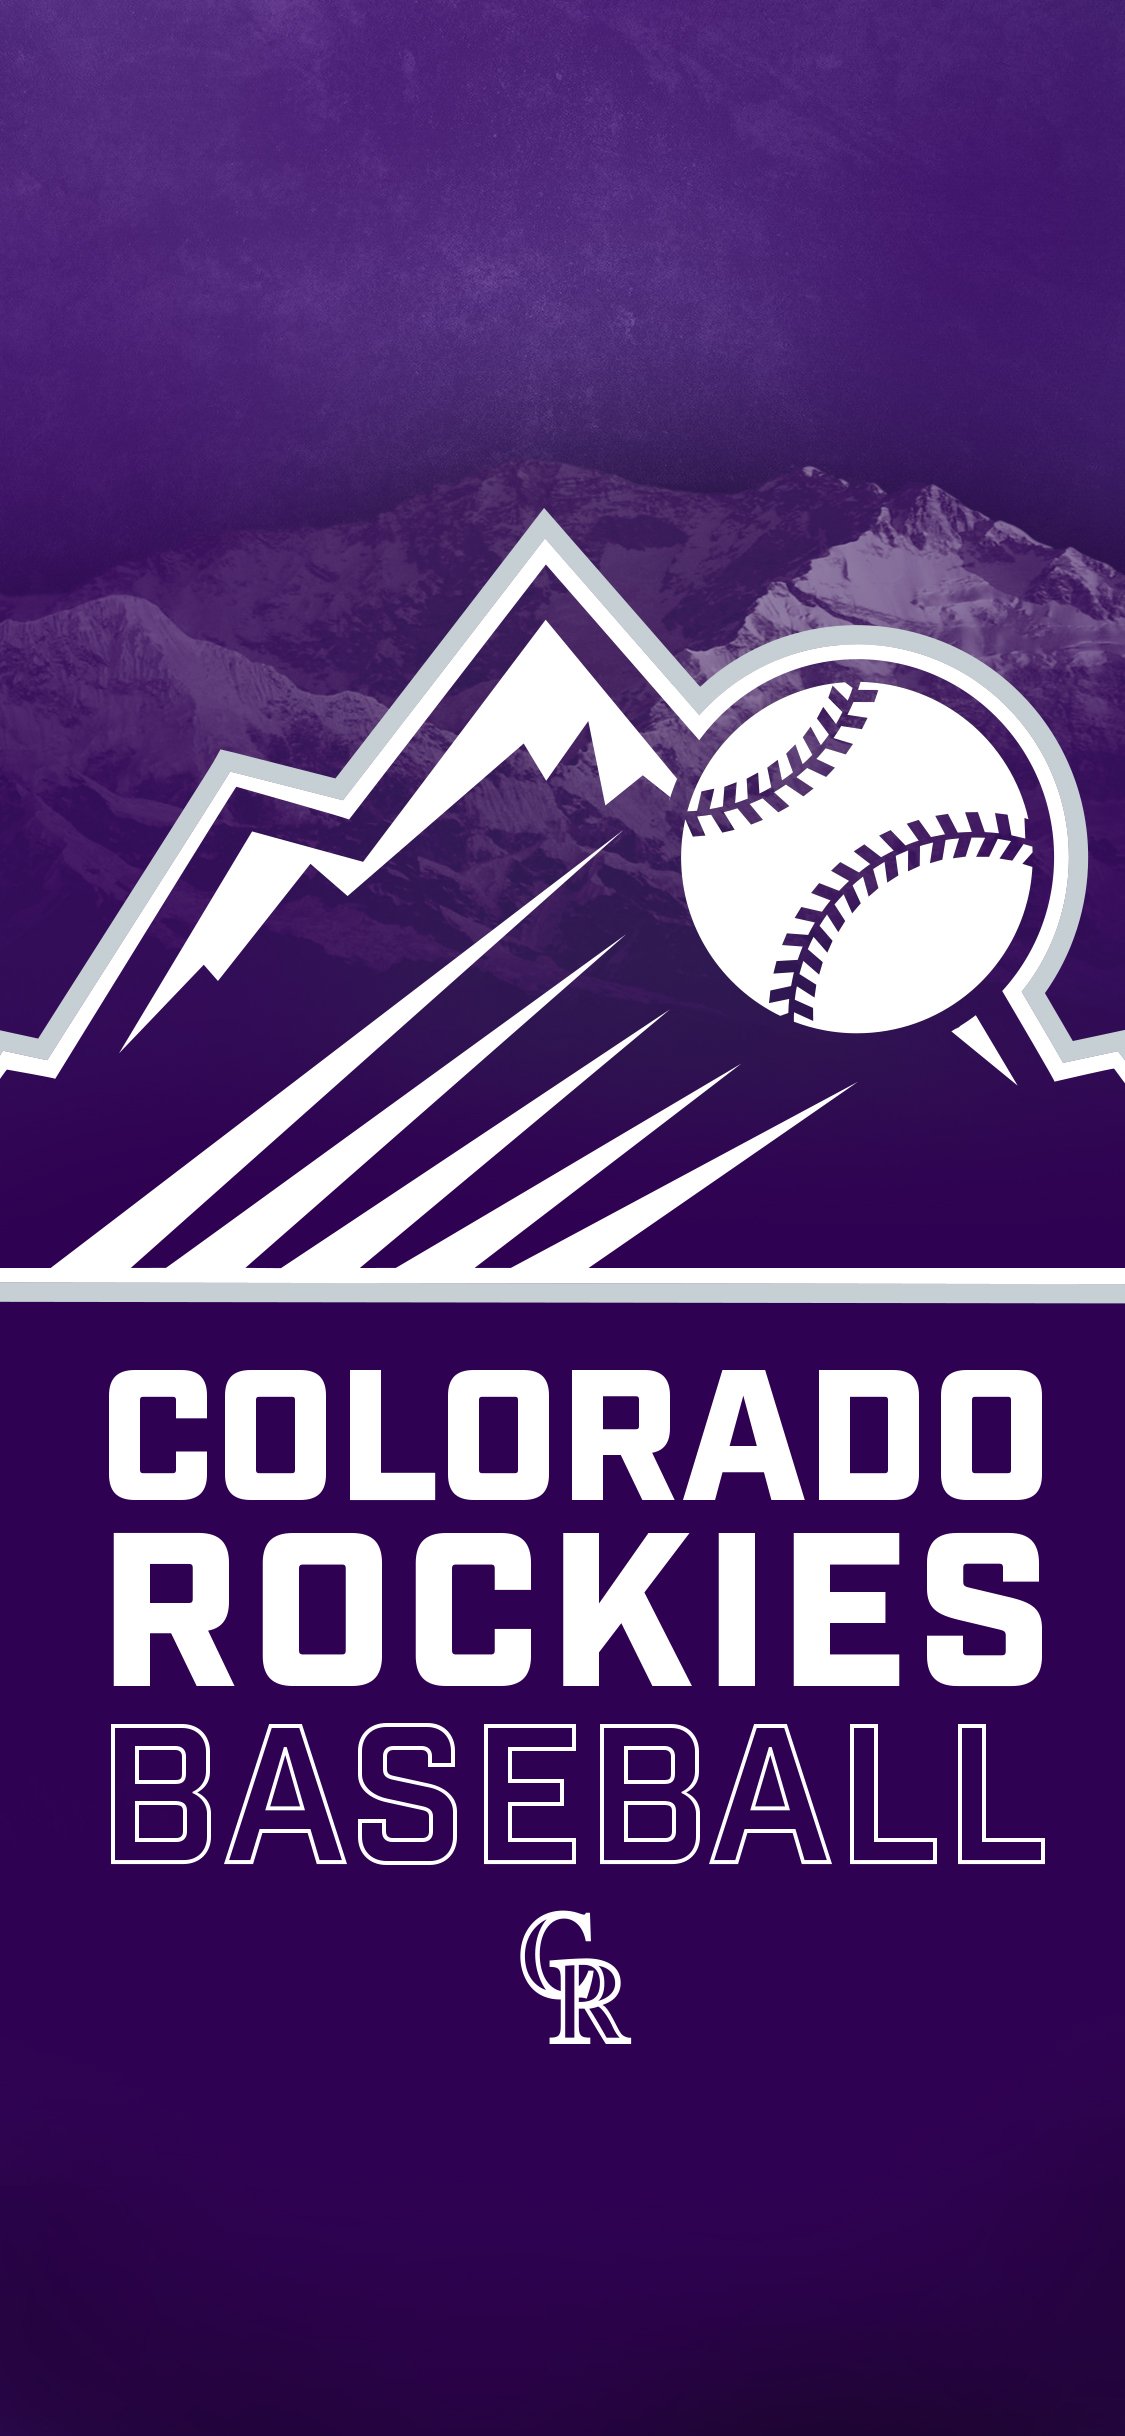 Colorado Rockies on X: Wallpaper on a Thursday? We're making